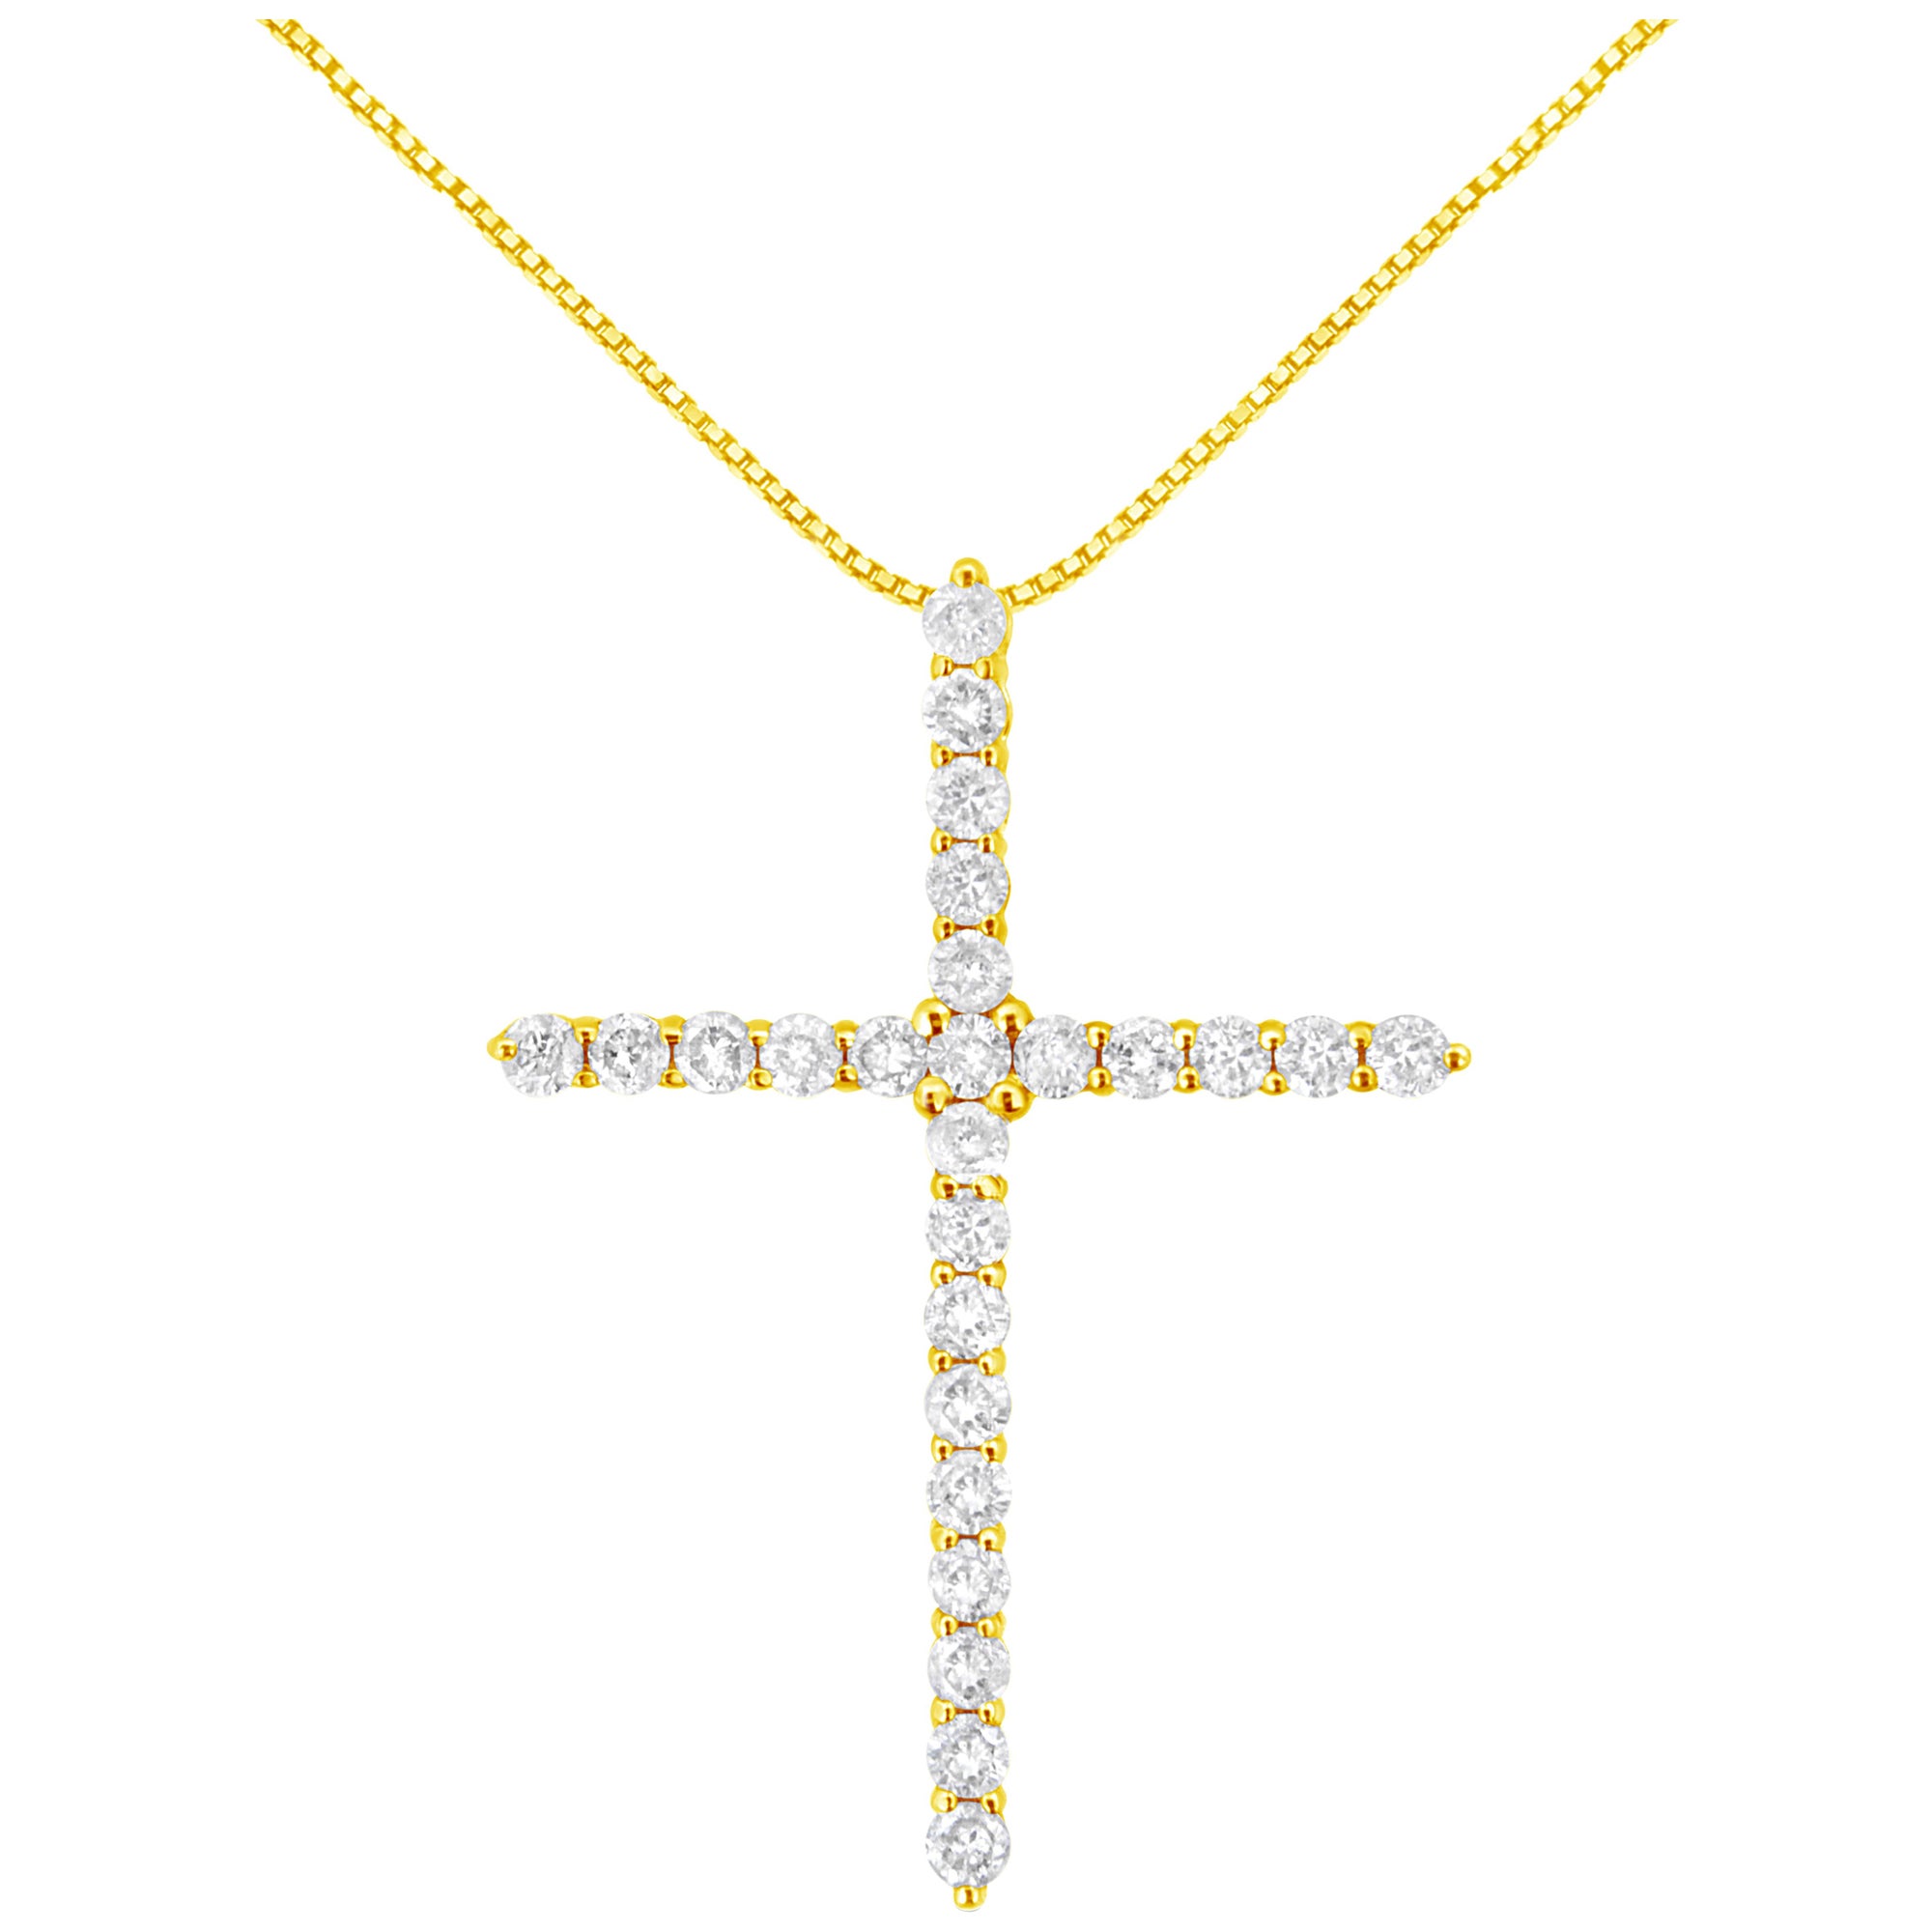 10K Yellow Gold 2.0 Cttw Round Diamond Cross Pendant Necklace with Box Chain For Sale